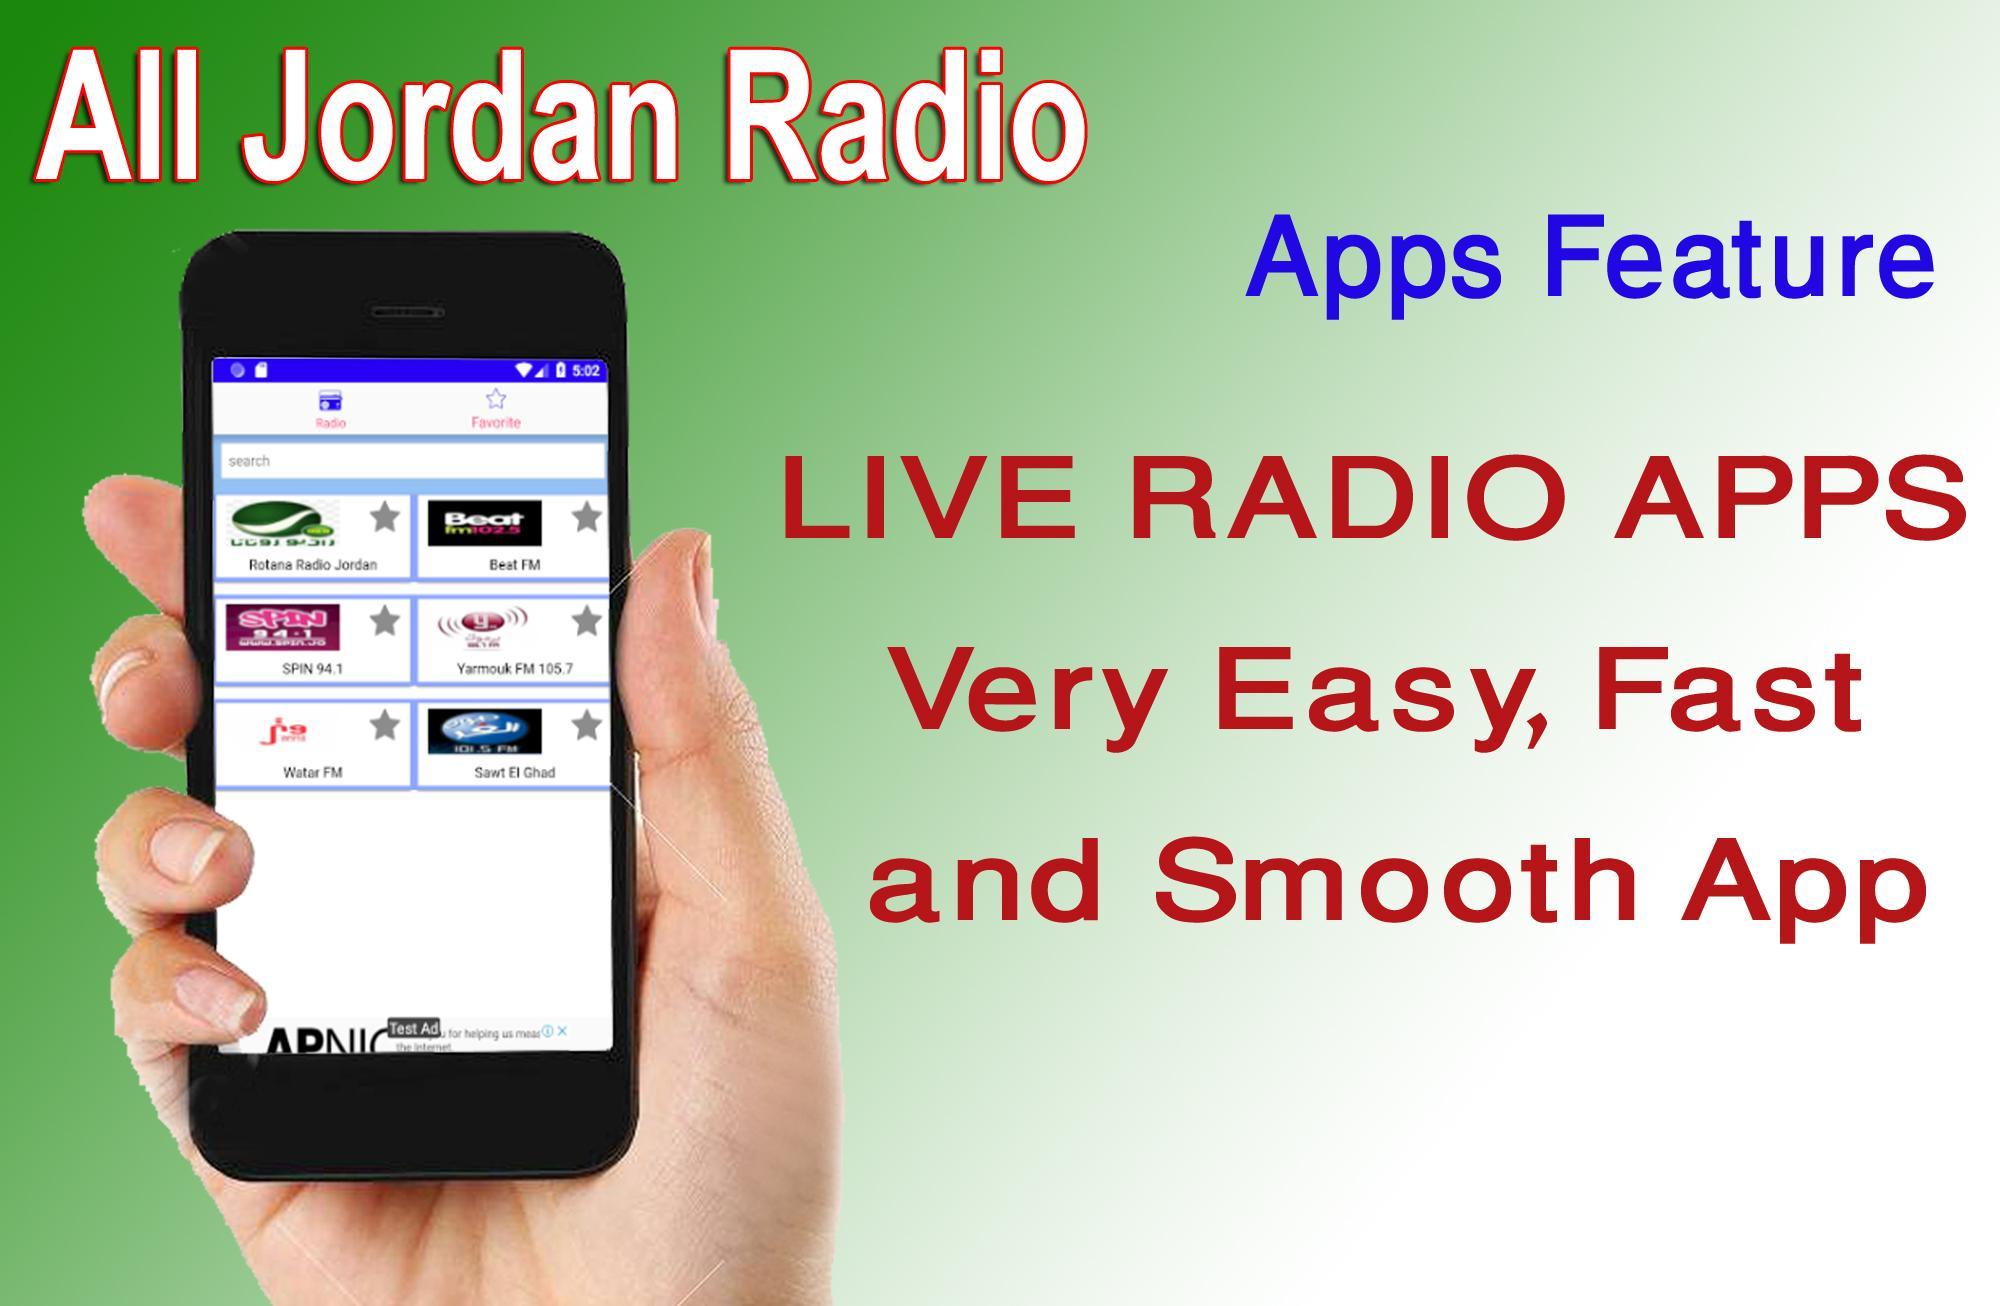 All Jordan Radios - Radio Jordan, FM Radio Jordan for Android - APK Download